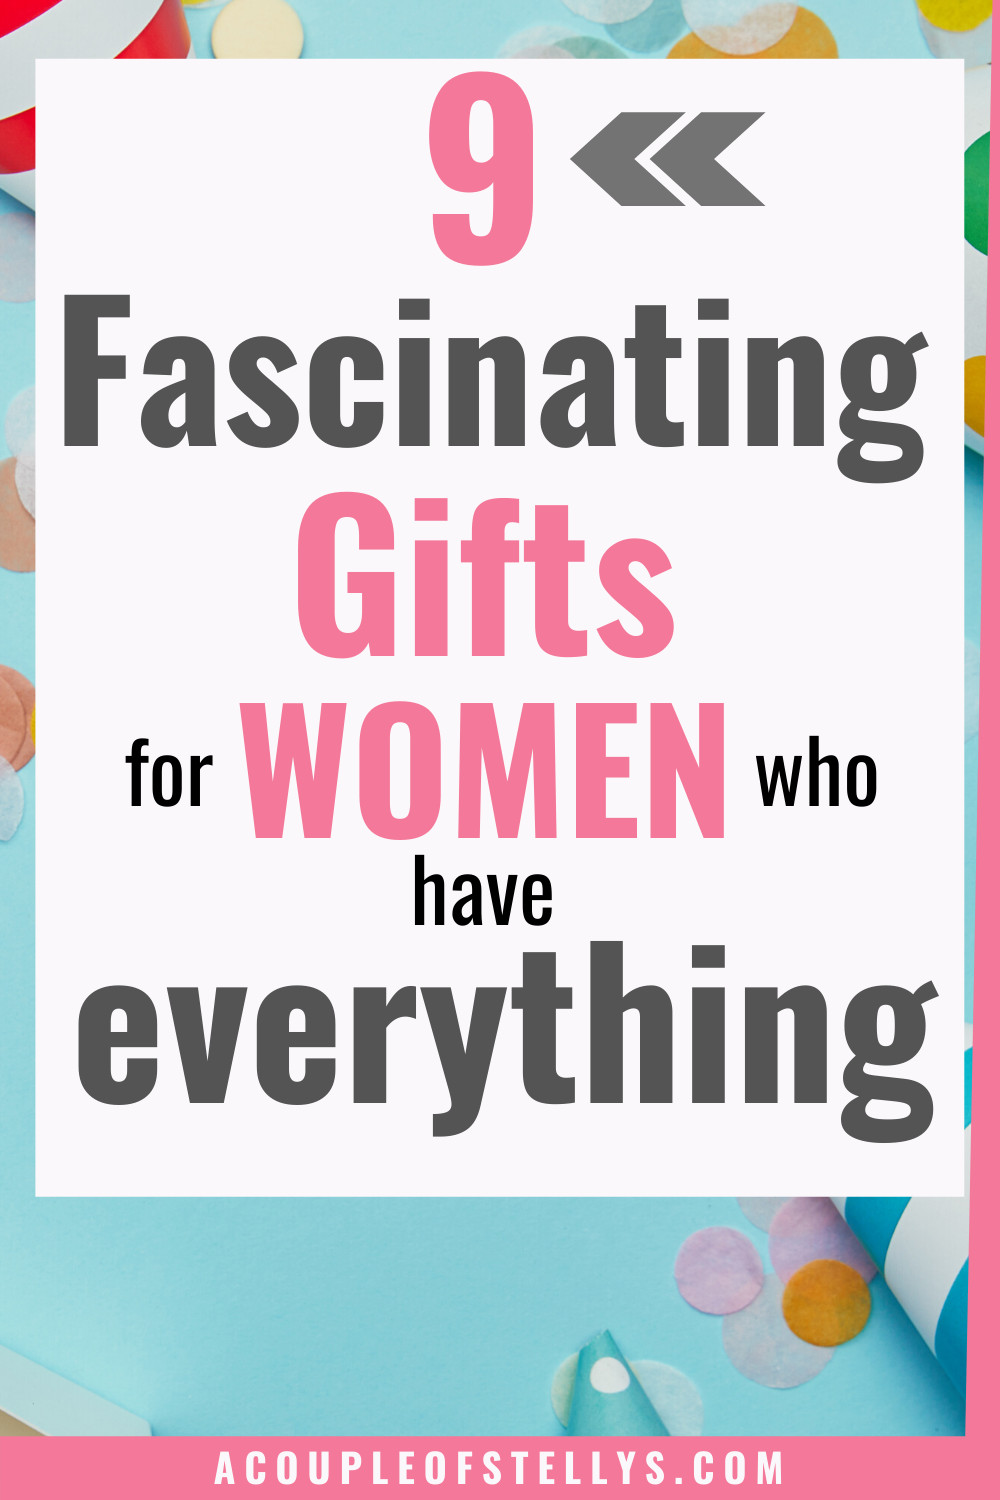 Birthday Gift Ideas For The Woman Who Has Everything
 9 Fascinating Gifts for the Woman Who Has Everything in